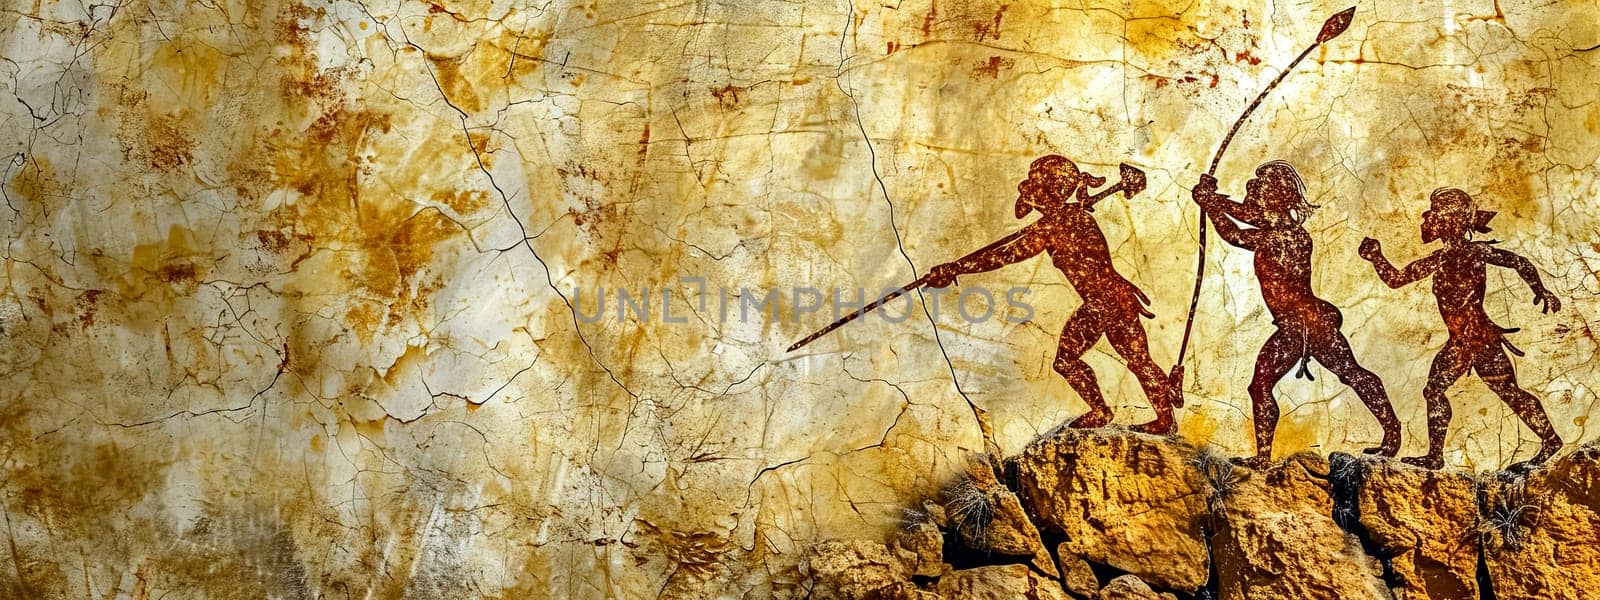 Artistic representation of ancient hunters on a rustic cave wall, copy space